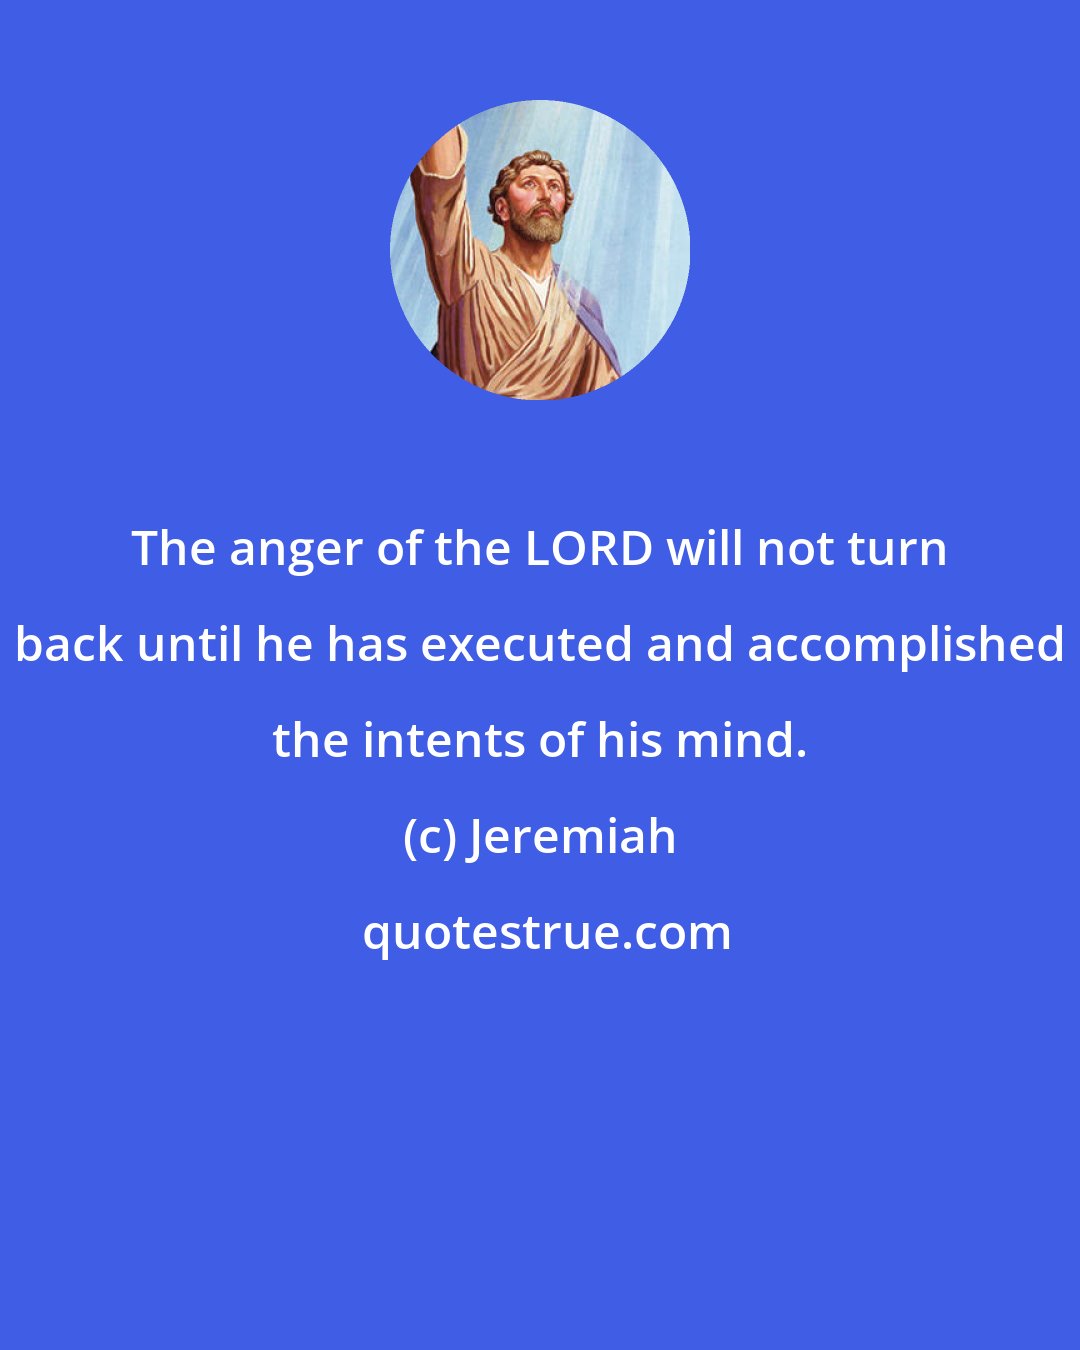 Jeremiah: The anger of the LORD will not turn back until he has executed and accomplished the intents of his mind.